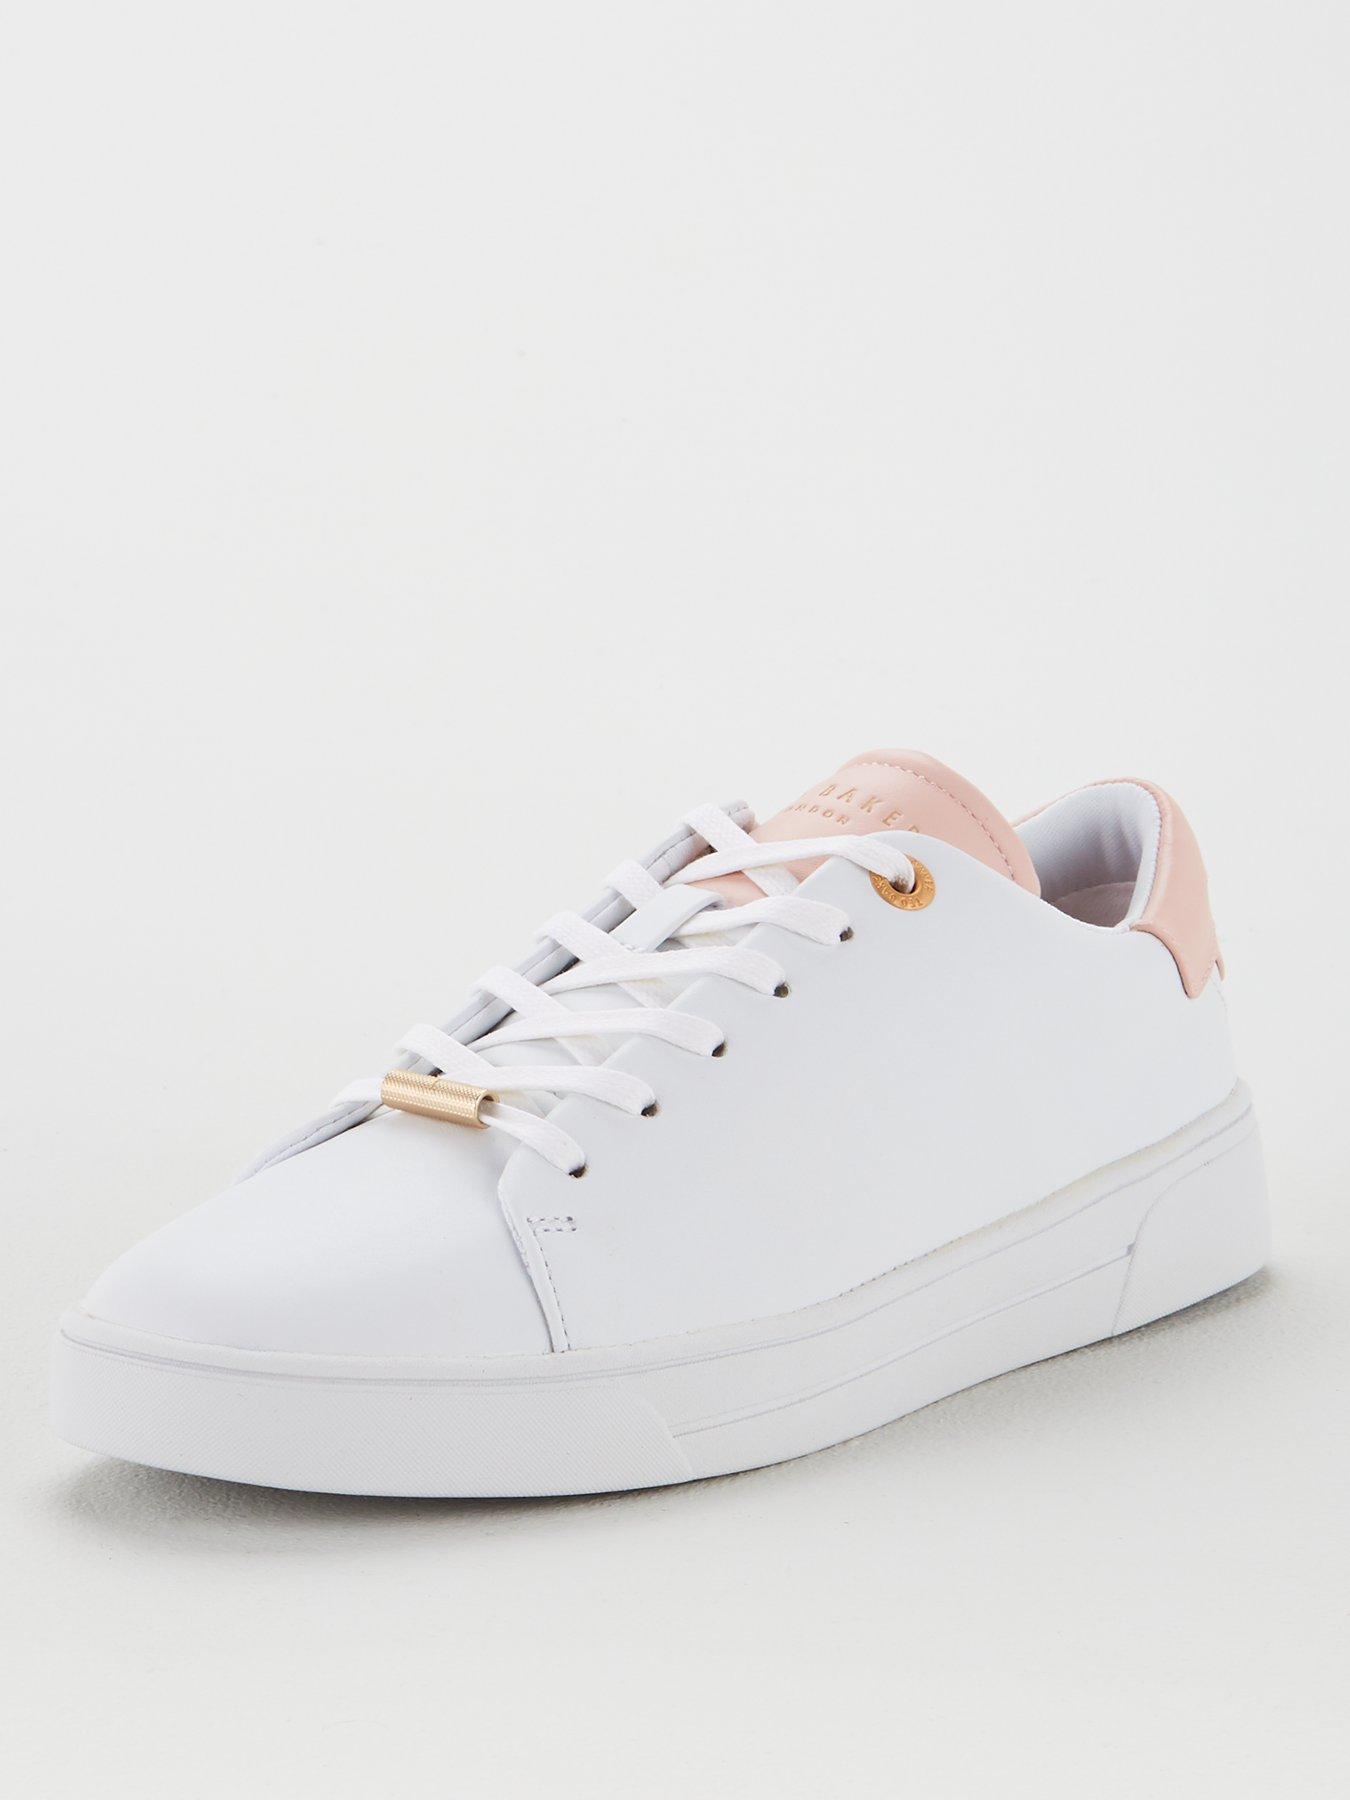 pink ted baker trainers